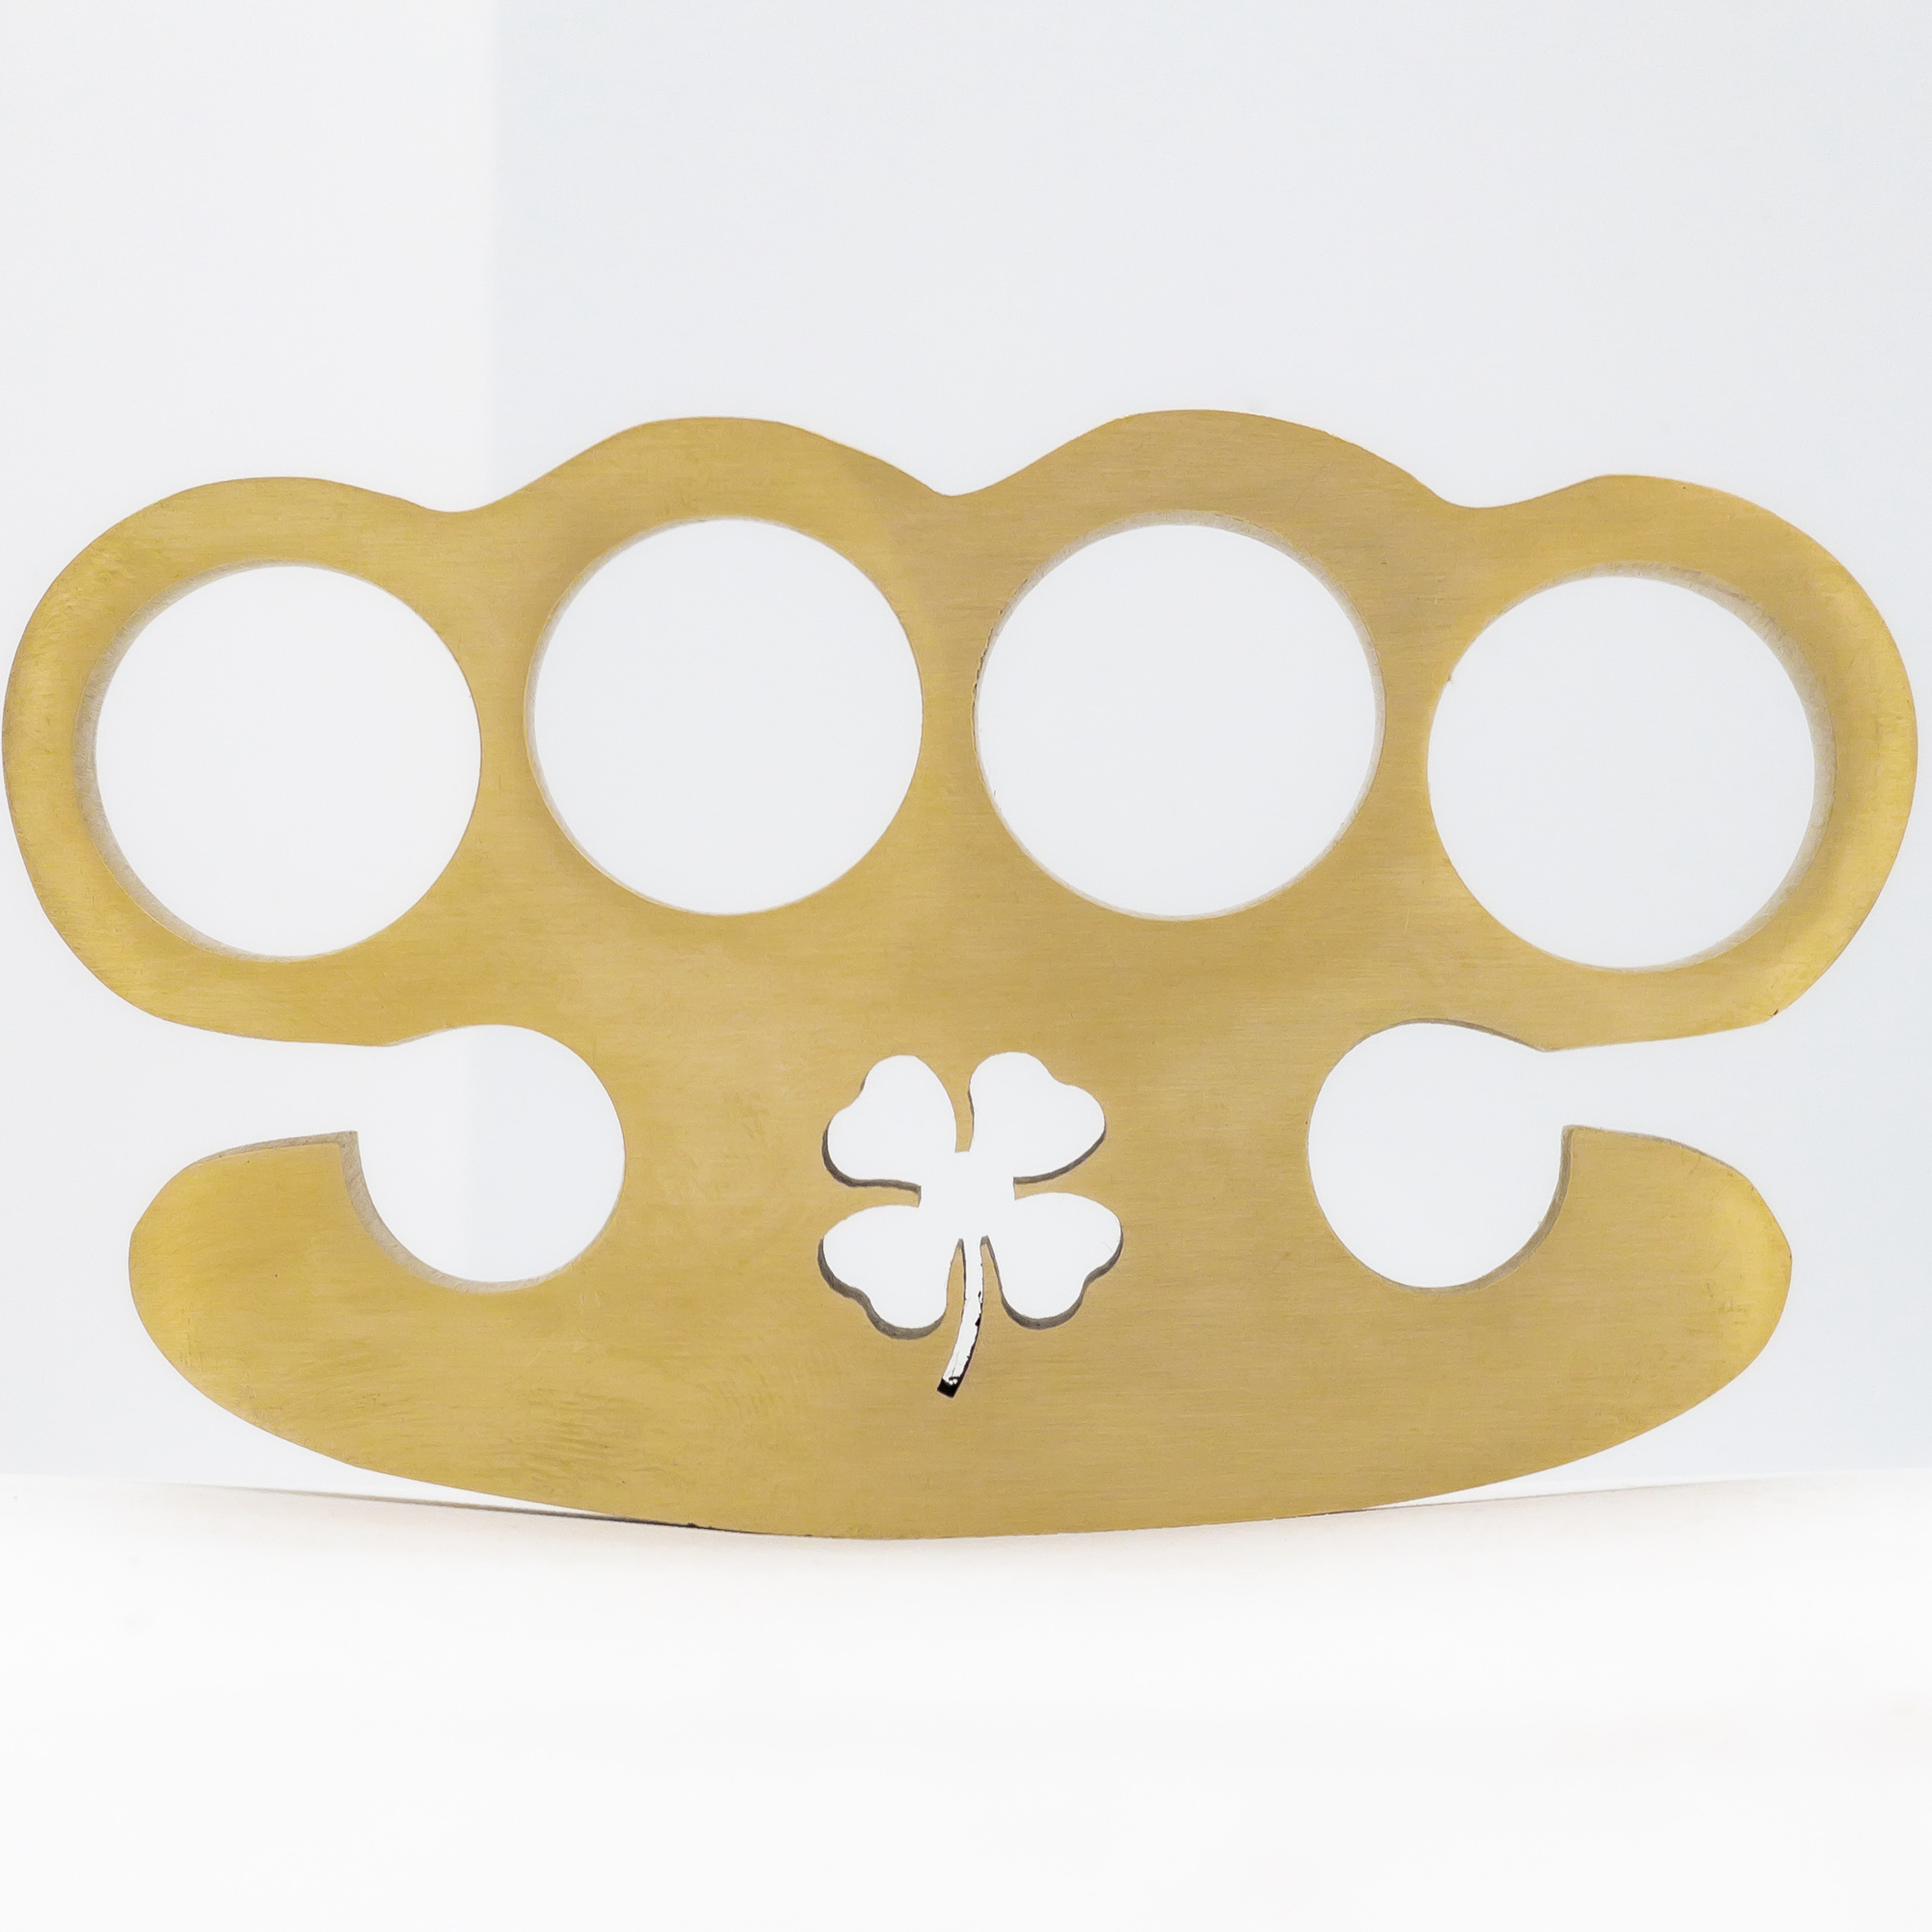 Lucky CHARM 100% Pure Brass Knuckle Paper Weight Accessory